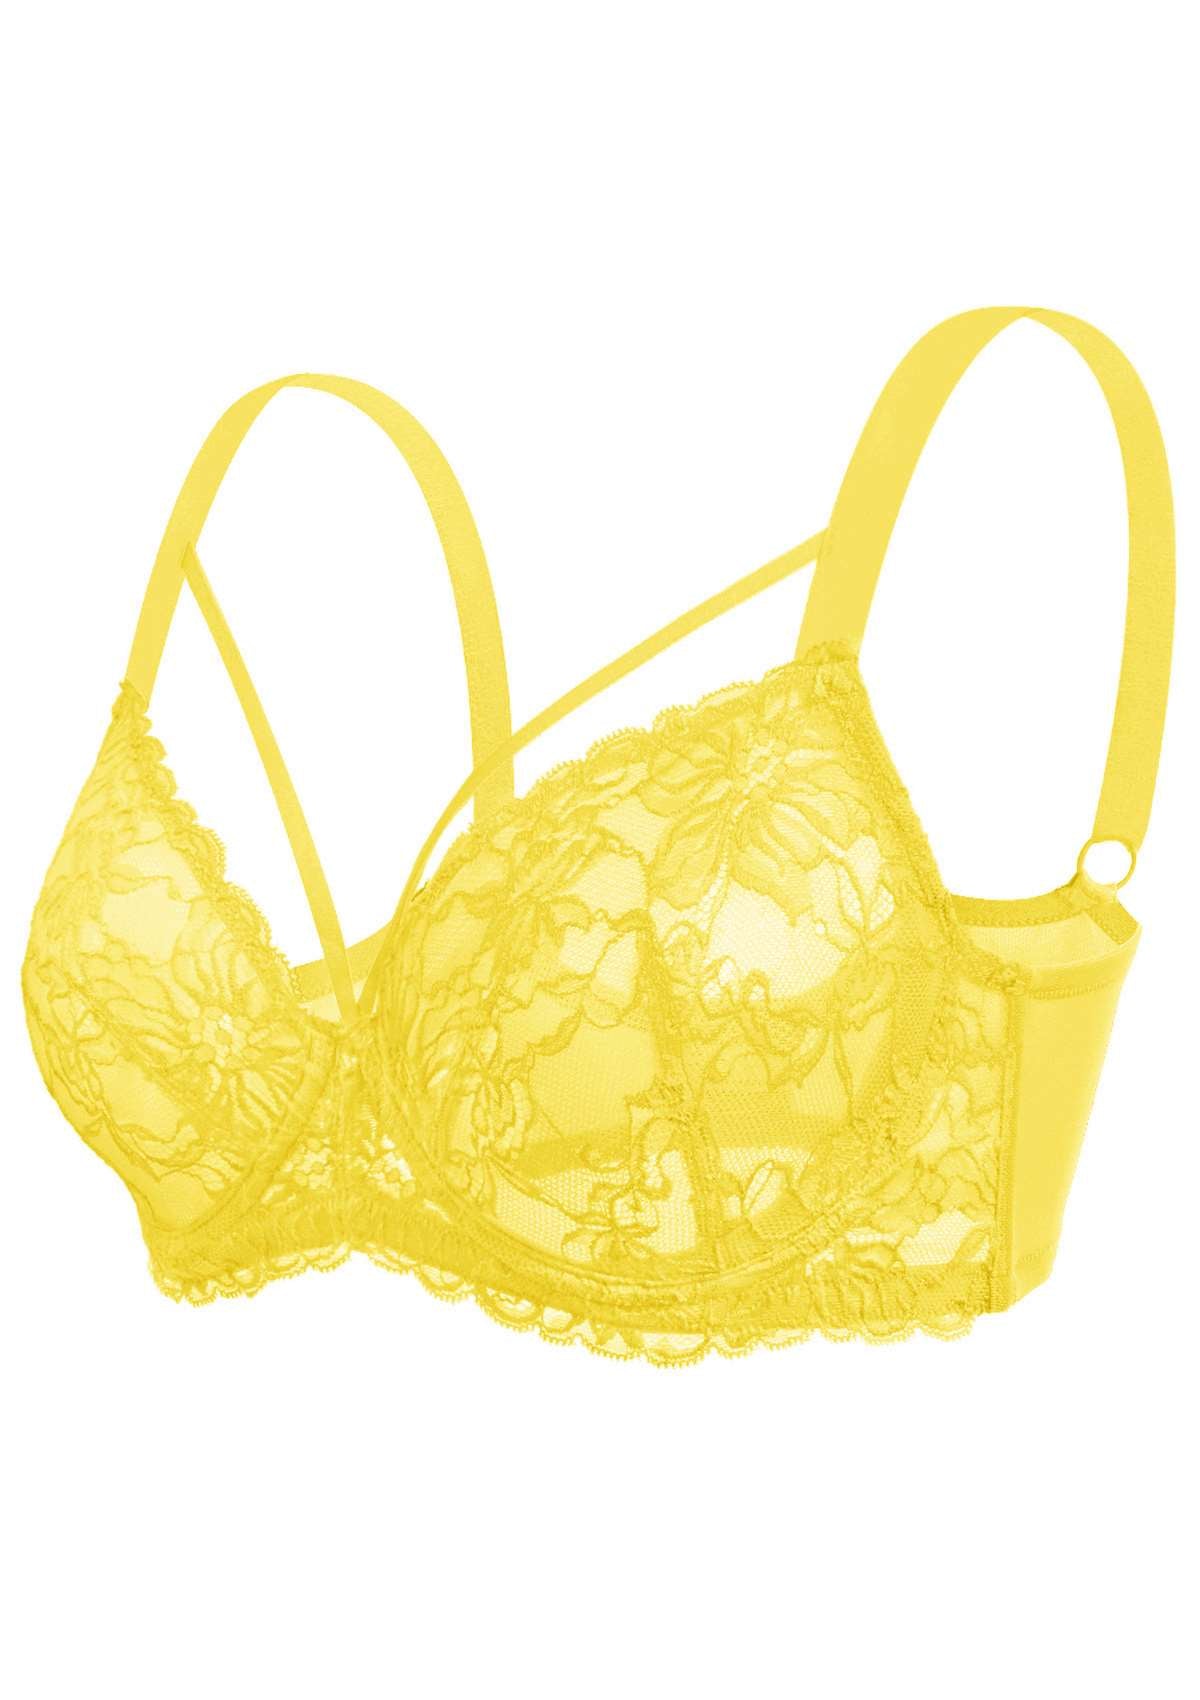 HSIA Unlined Lace Mesh Minimizer Bra For Large Breasts, Full Coverage - Bright Yellow / 38 / G